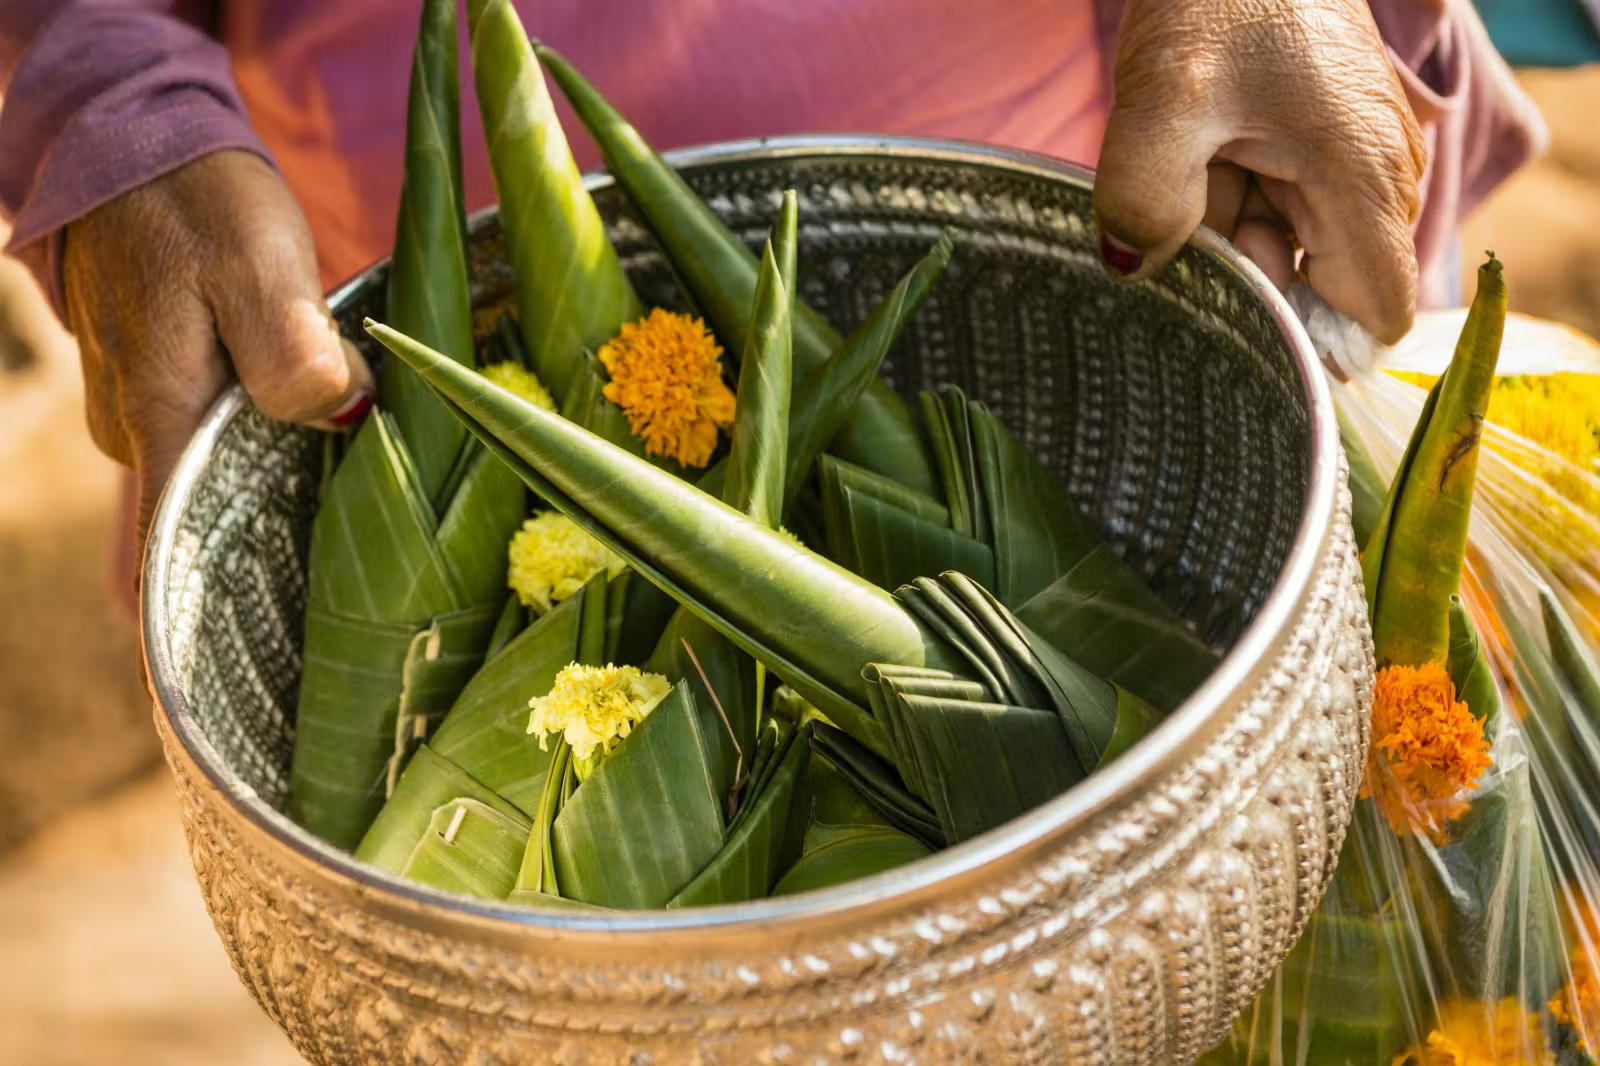 A woman holds a basket full of marigold offerings